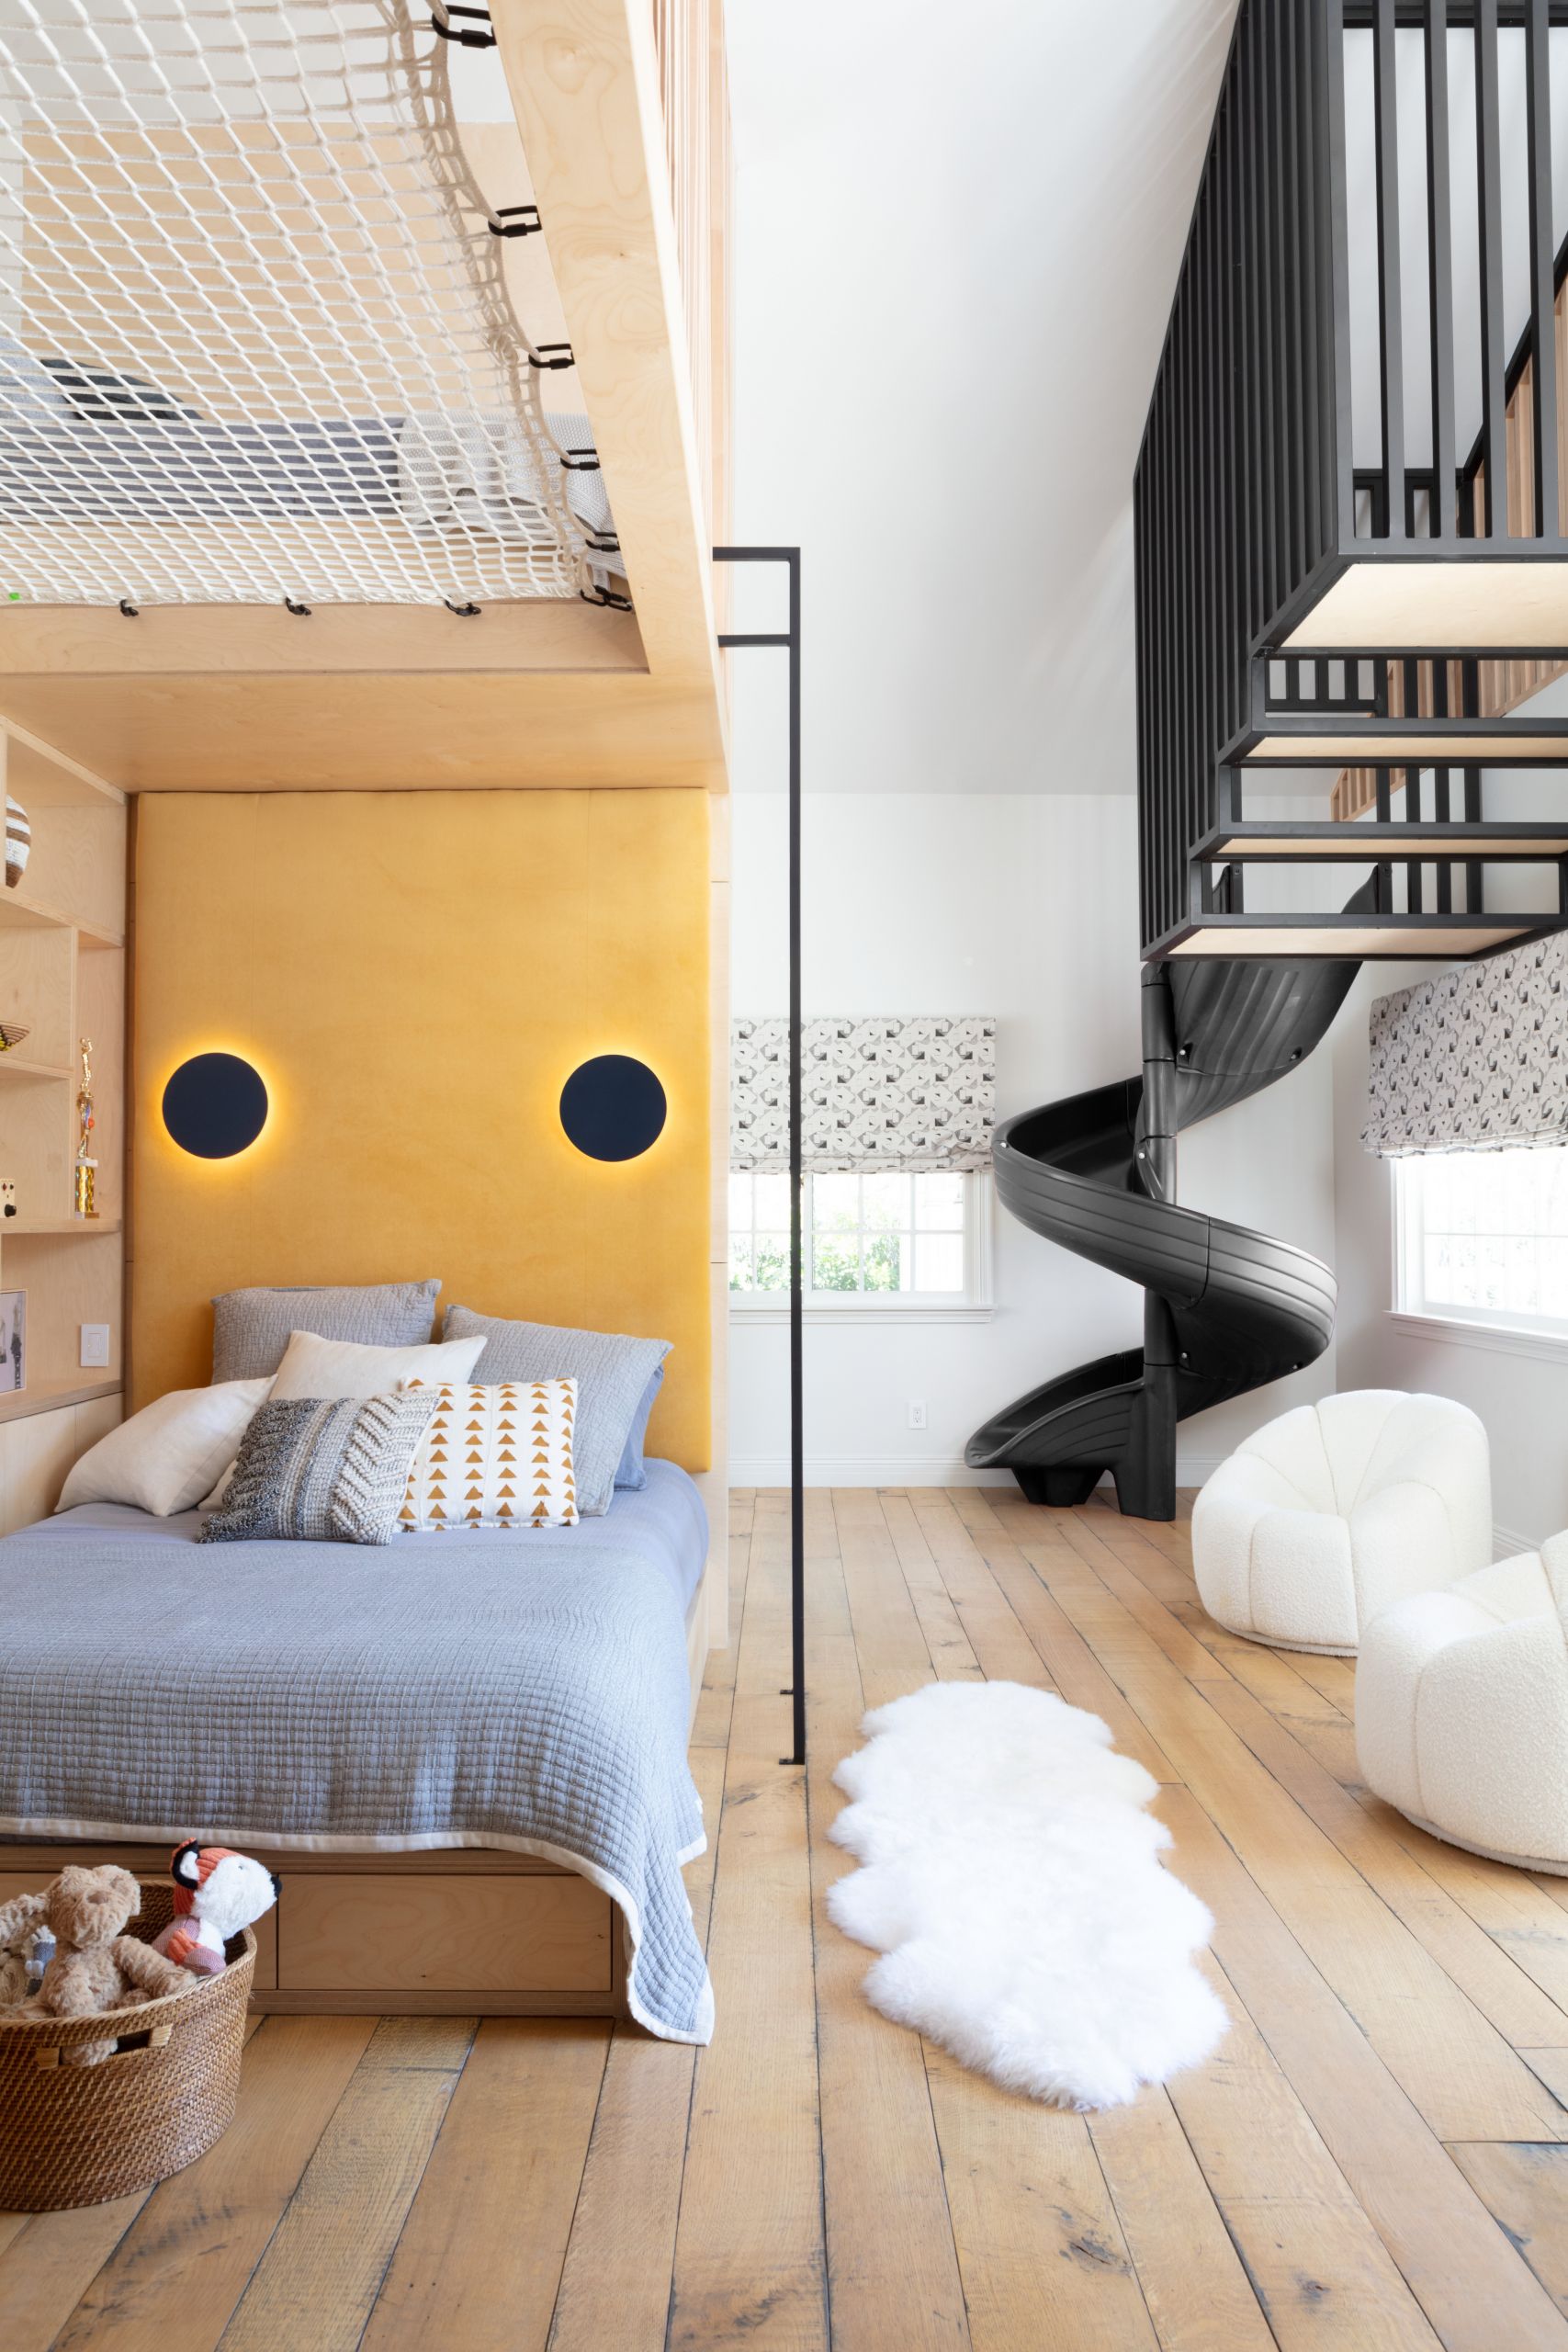 Cool Kids Bedroom Ideas
 3 Kids Bedroom Ideas We Learned From This Playful L A Home